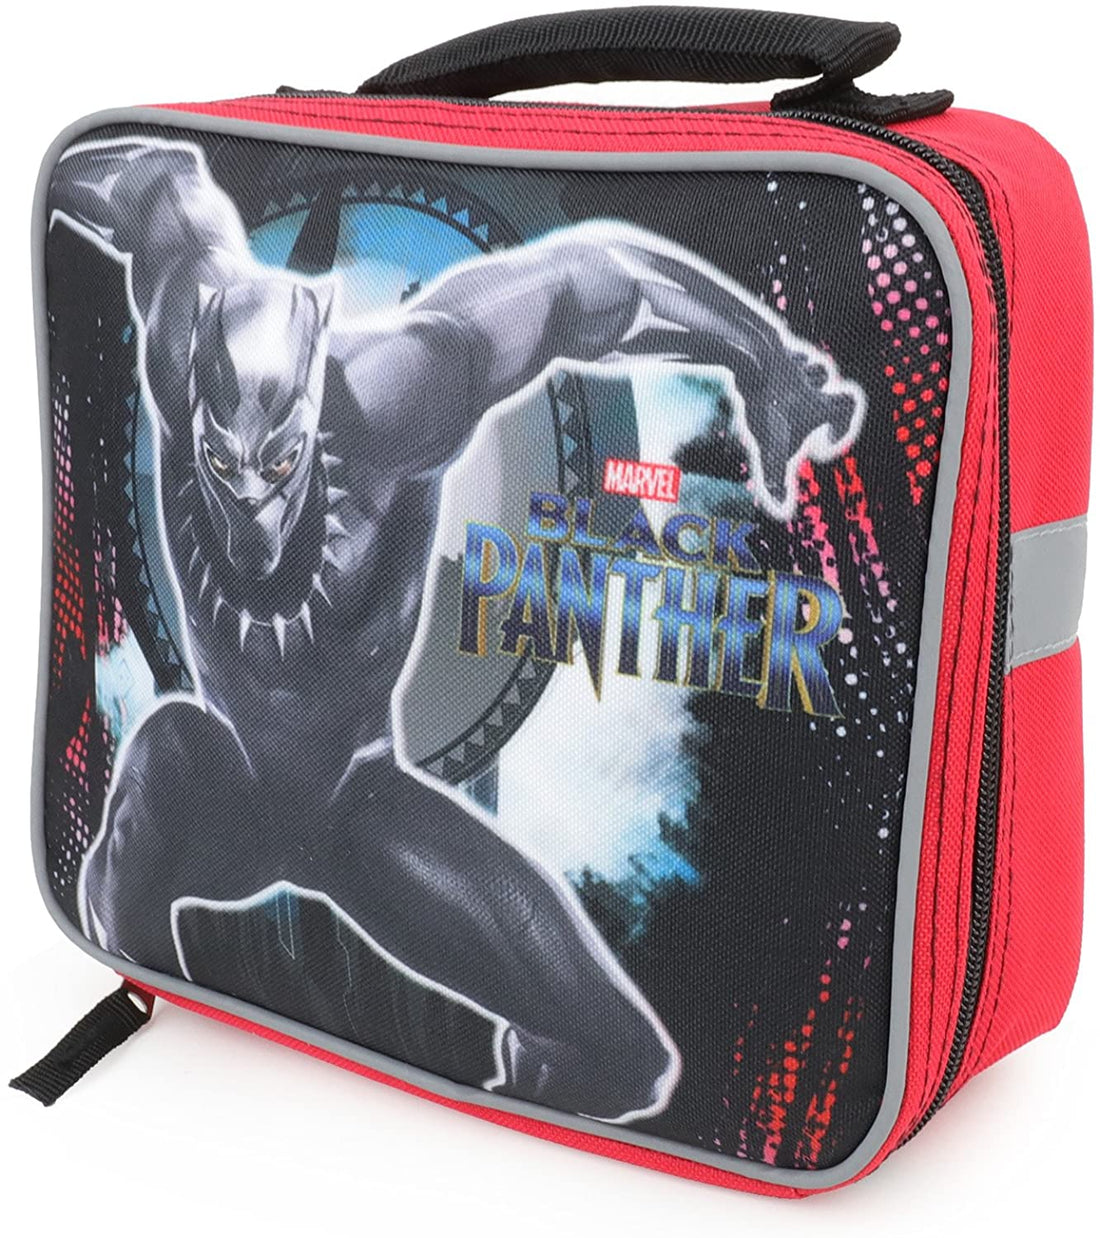 Trendy Apparel Shop Black Panther Prince T'Challa Graphic Print School Lunch Bag